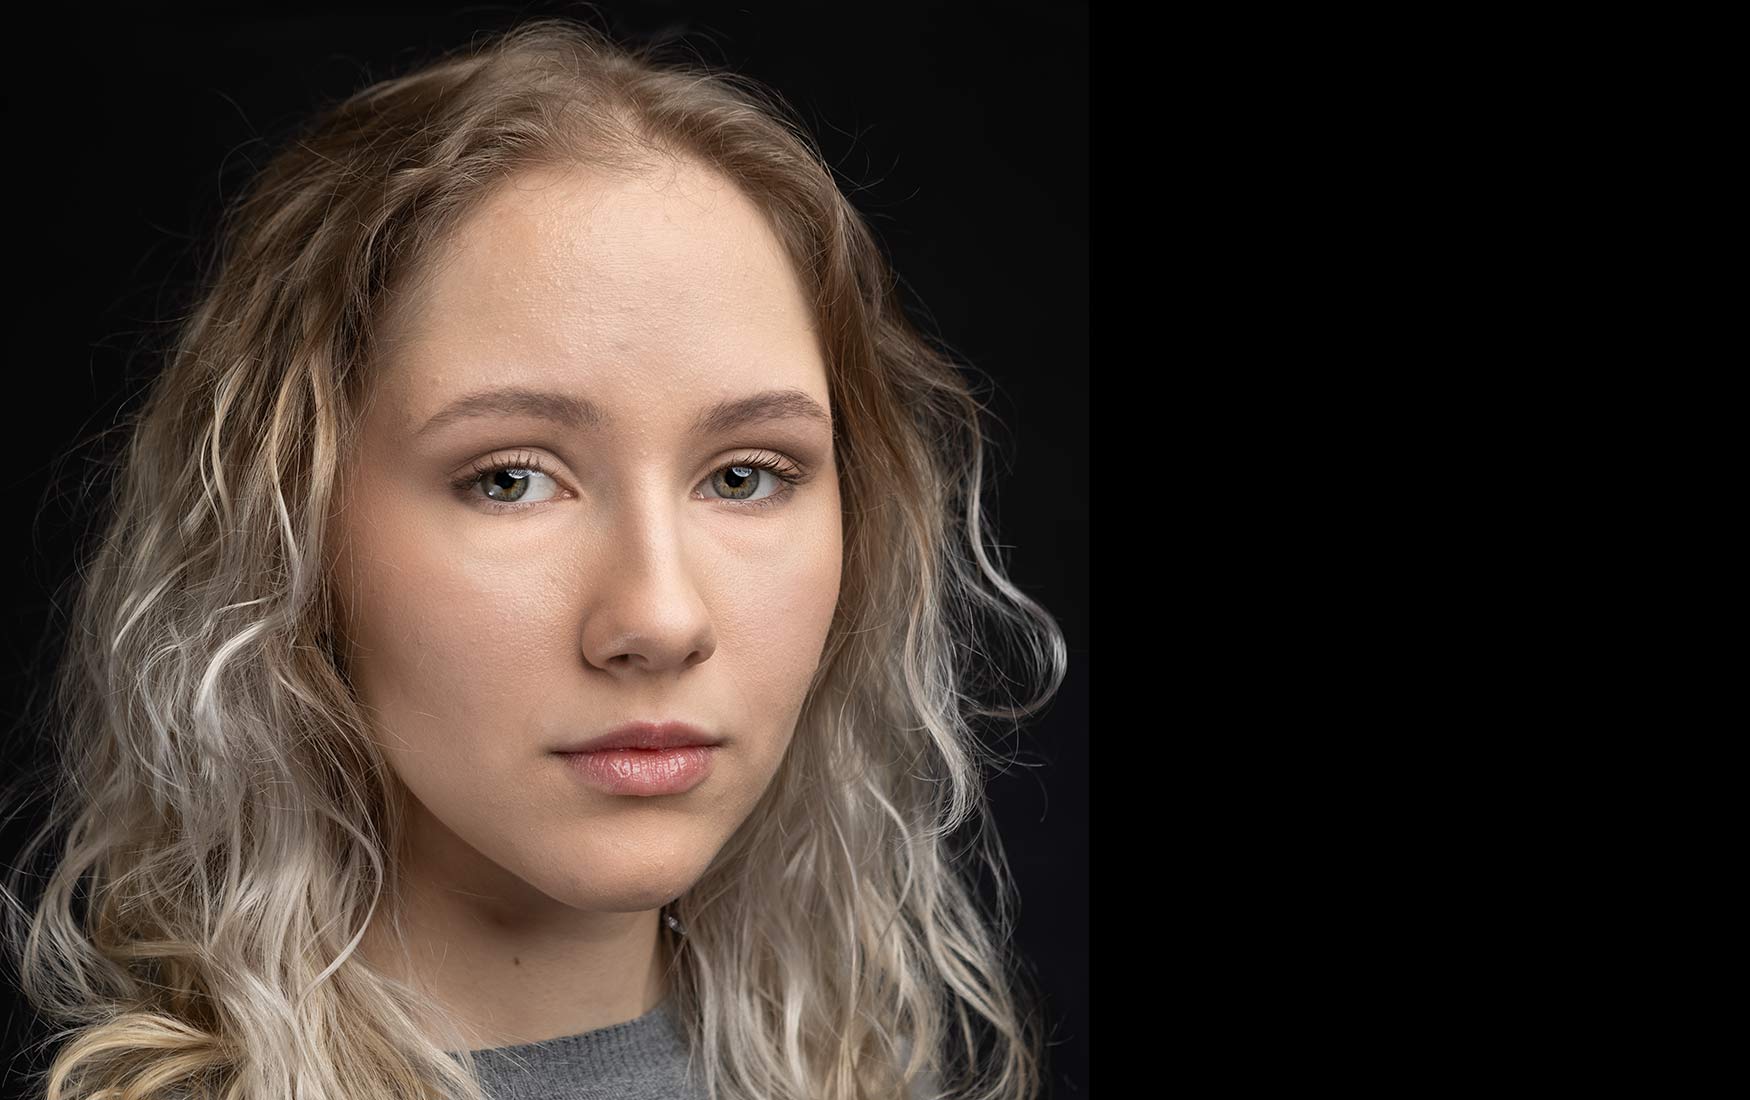 Actor headshot closely cropped portrait of a young female actor with blond streaked hair and a soulful look against a black background